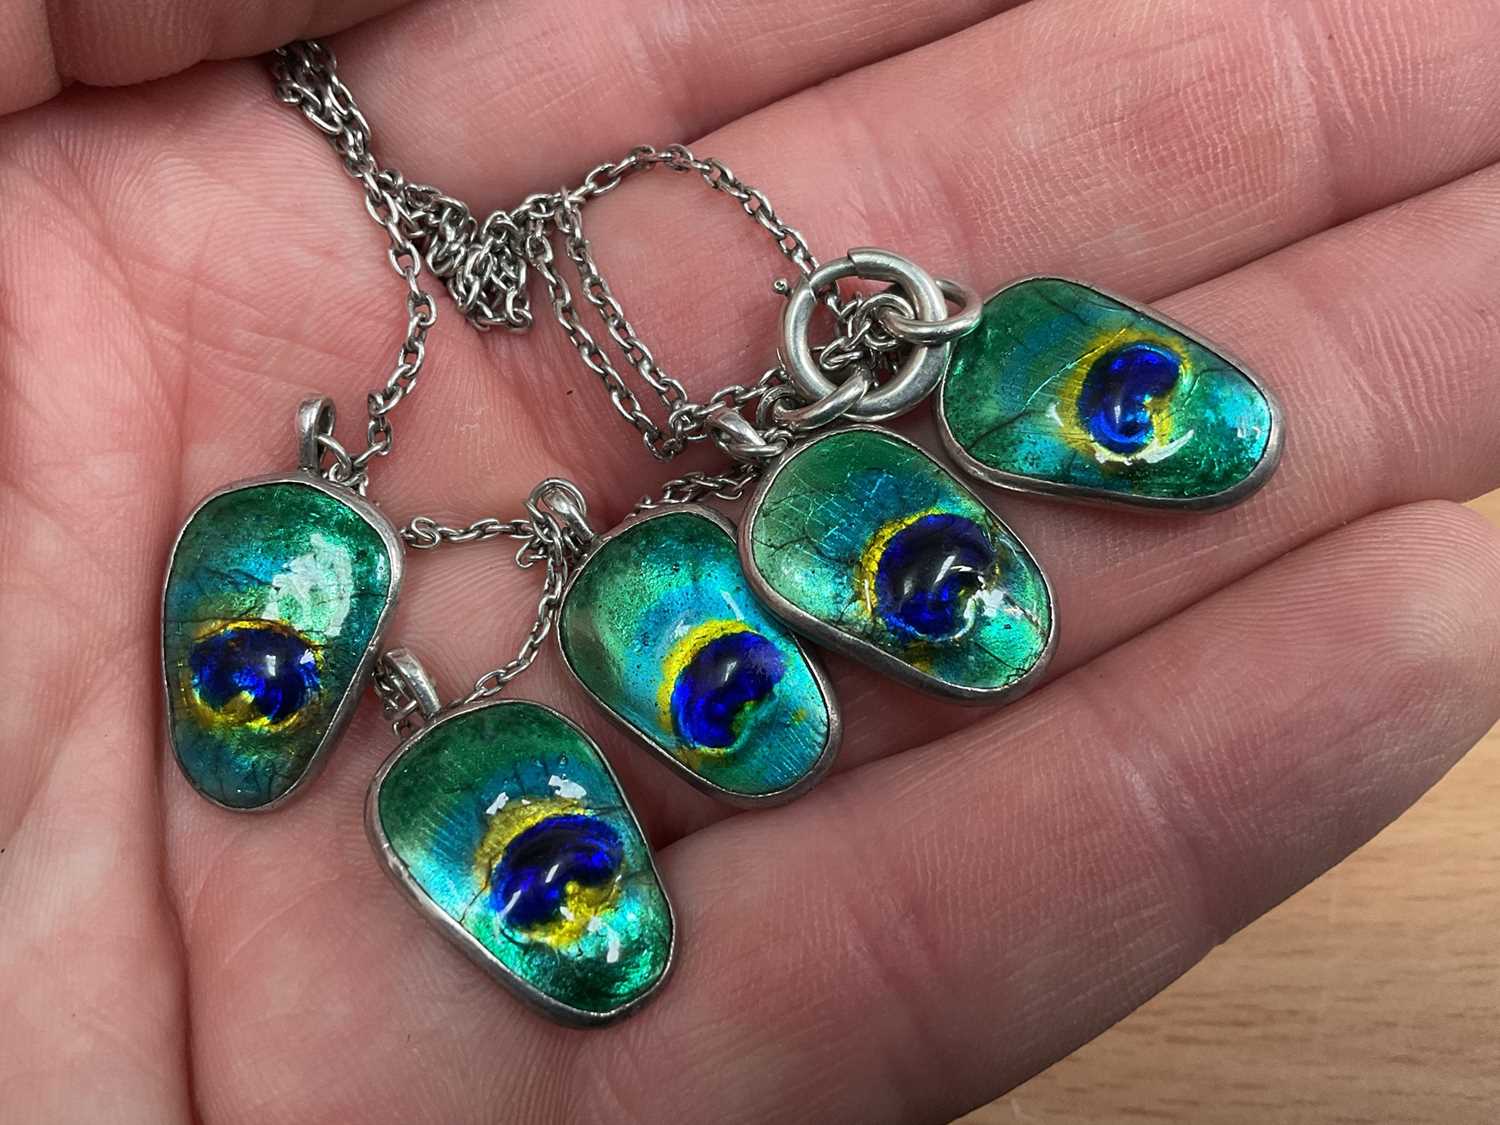 Art Nouveau style white metal and enamel necklace with five suspended pendants resembling peacock fe - Image 4 of 4